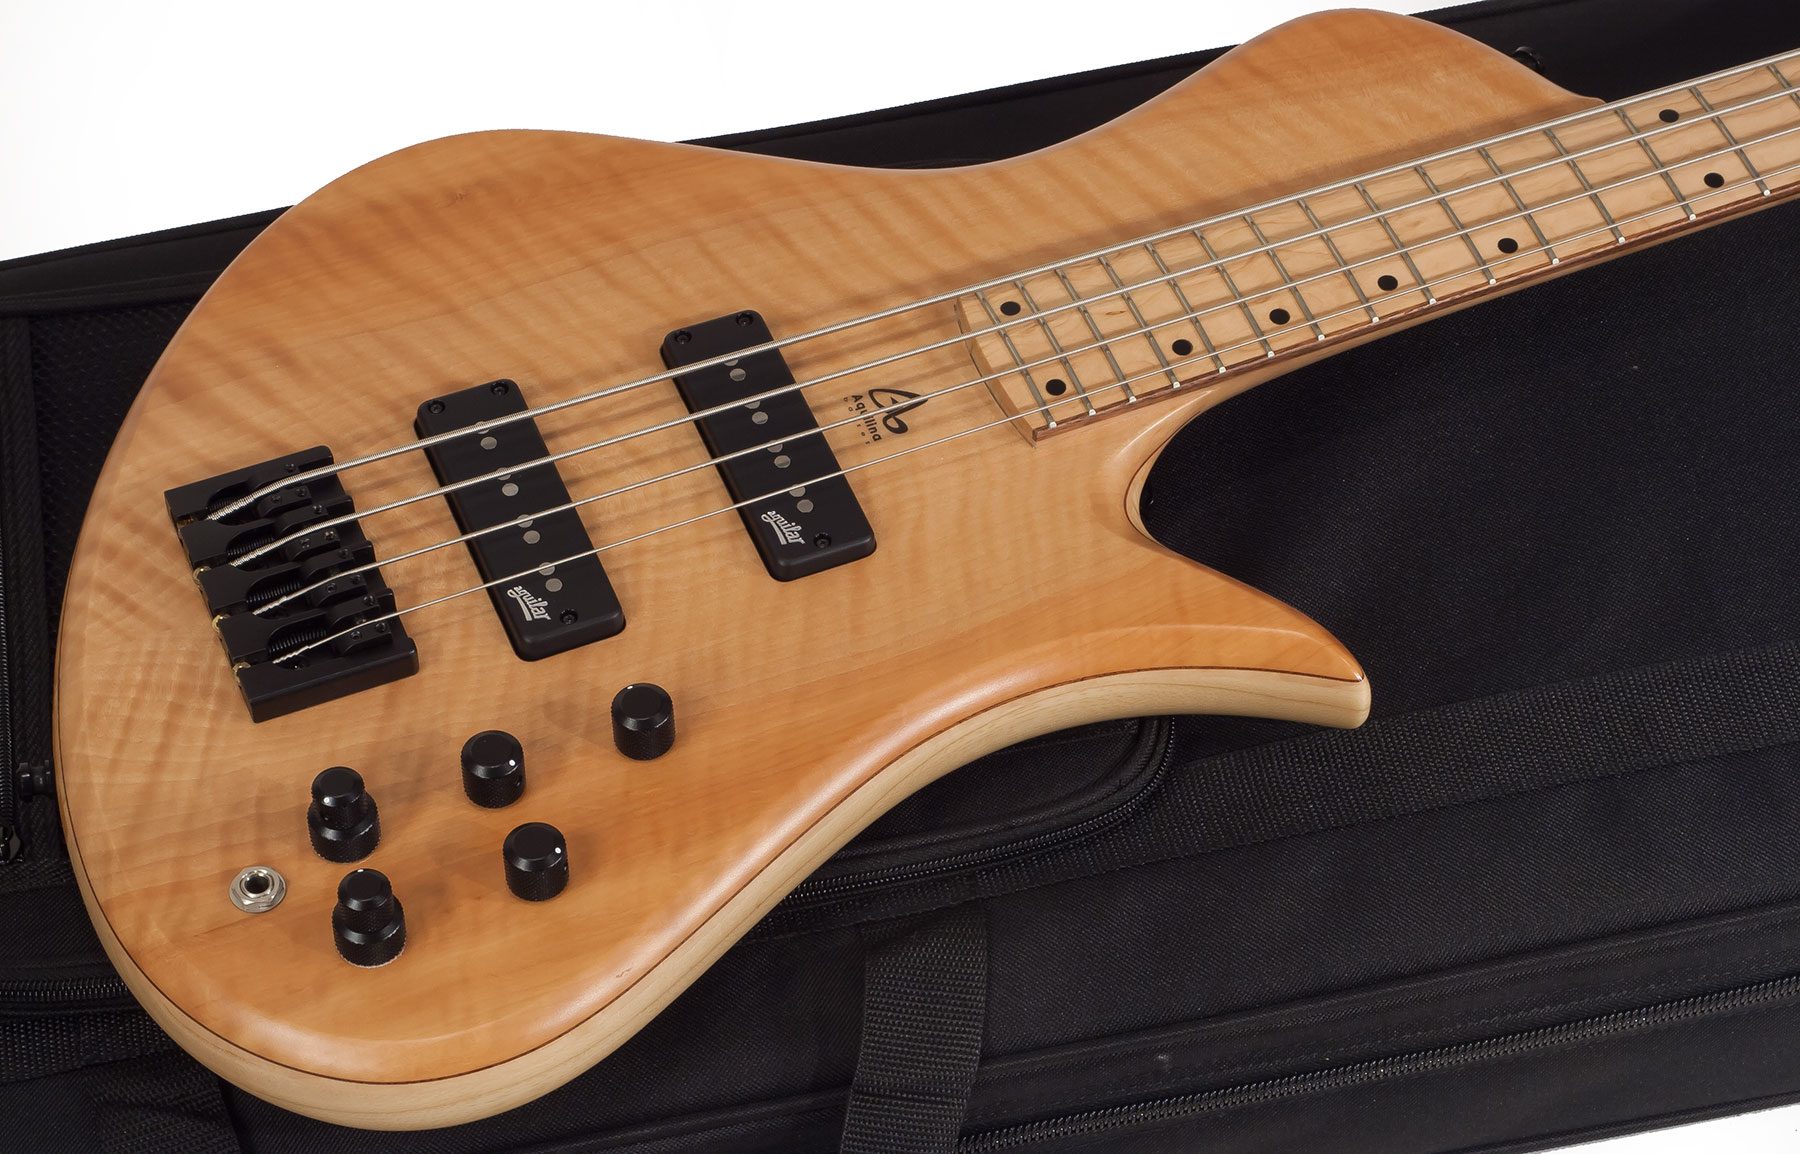 Aquilina Shelby 4 Custom Aulne/frene Active J.east Noi #01854 - Natural - Solid body electric bass - Variation 1